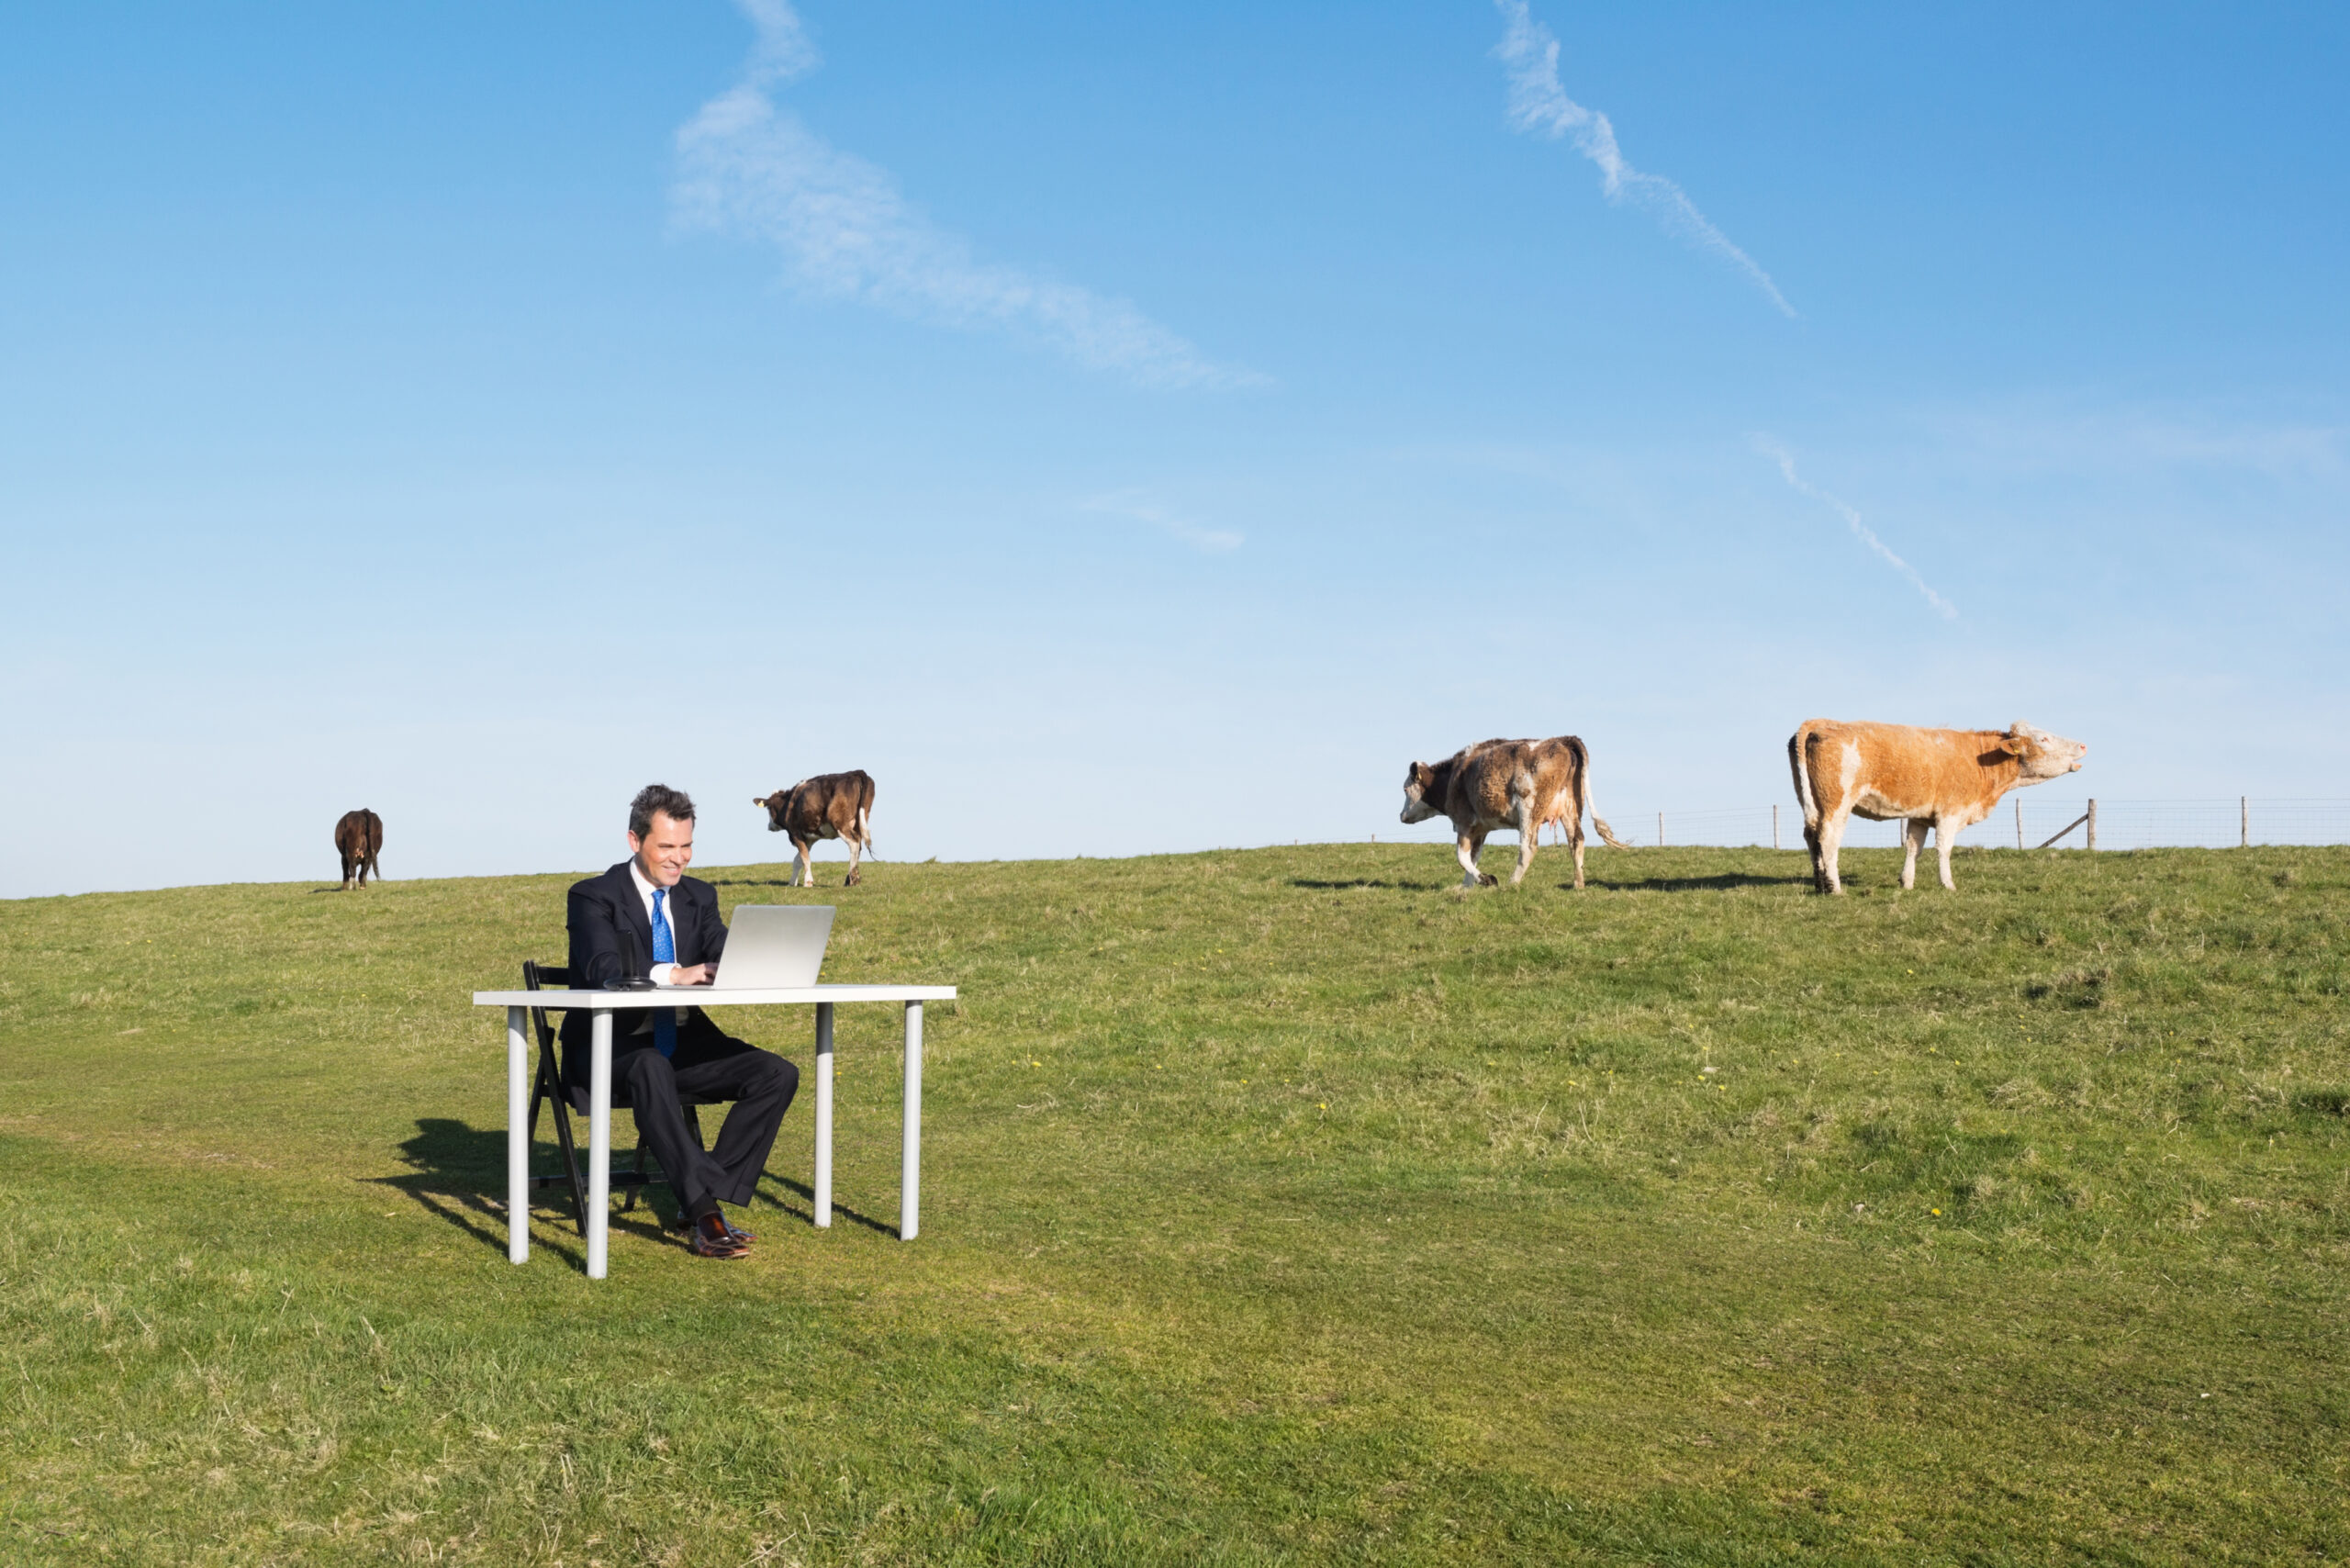 Wide open spaces put traditional offices out to pasture